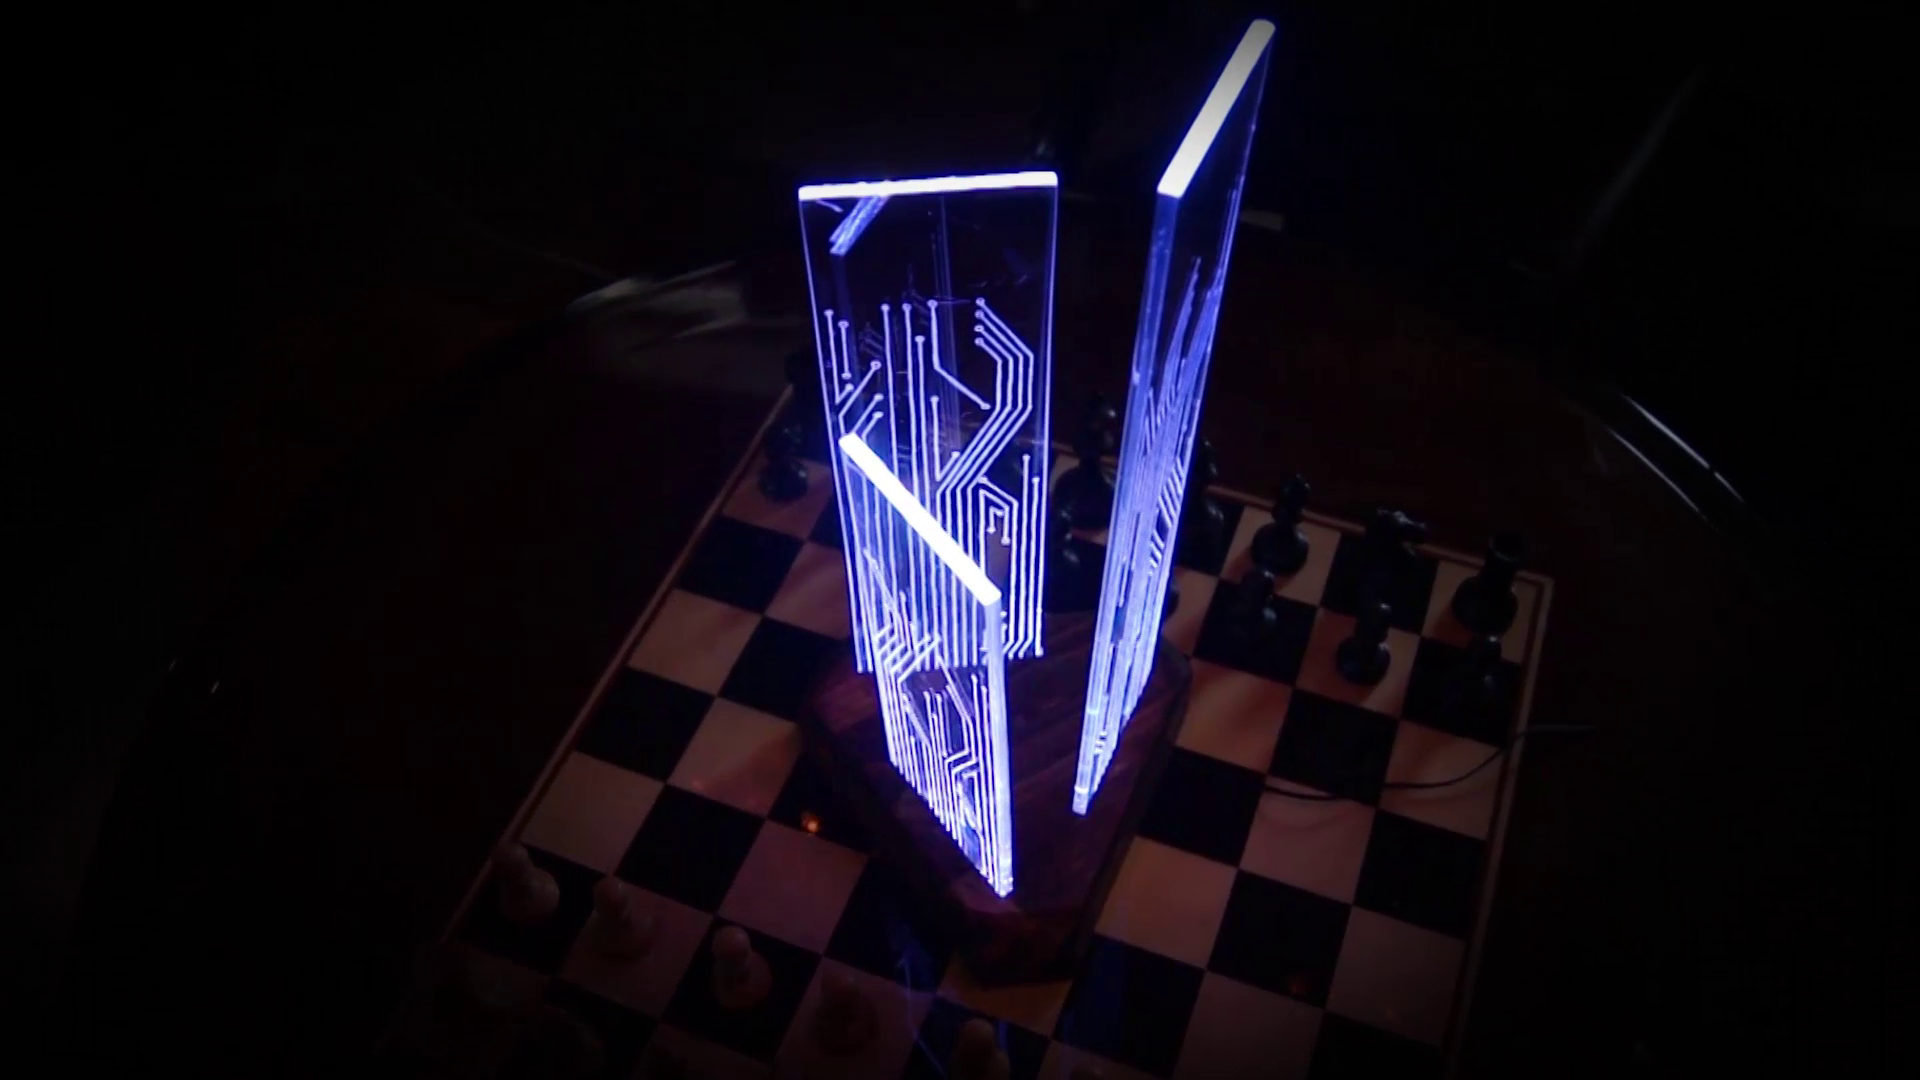 acrylic-led-lamp-pcb-inspired-colour-changing-rgb-2016-11-26-17h43m33s358.png